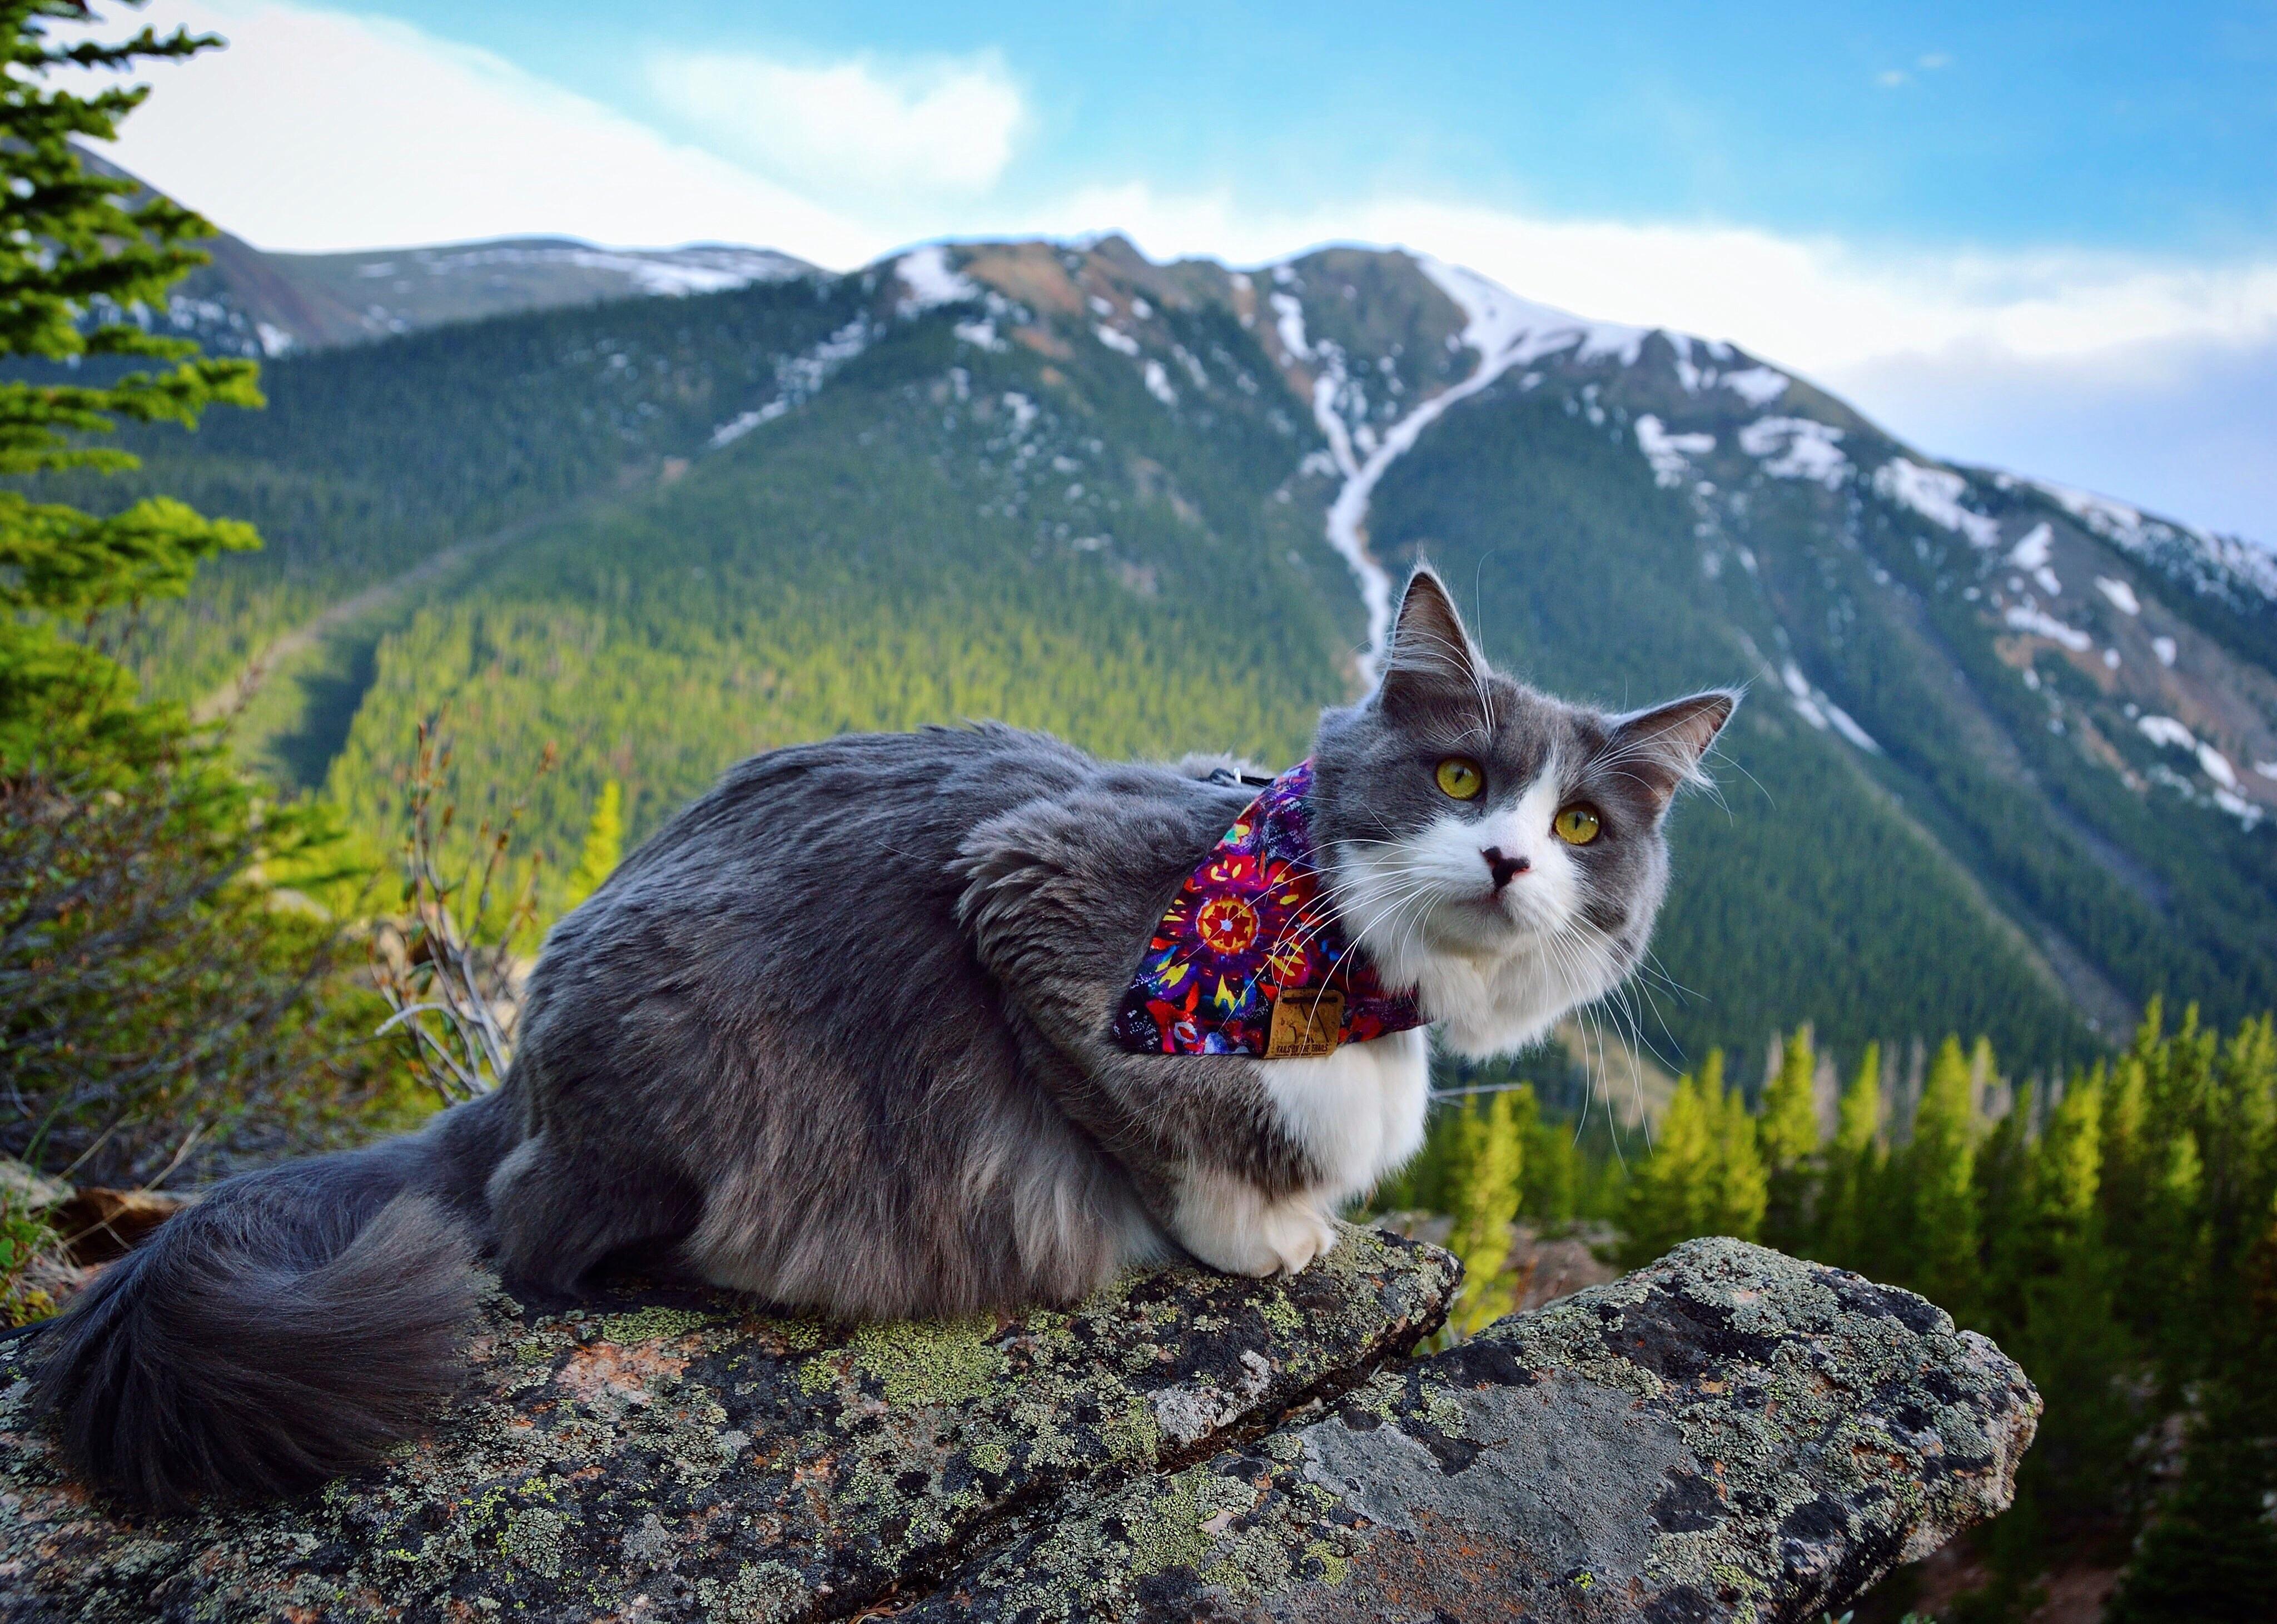 The meowntains are beautiful this time of year.